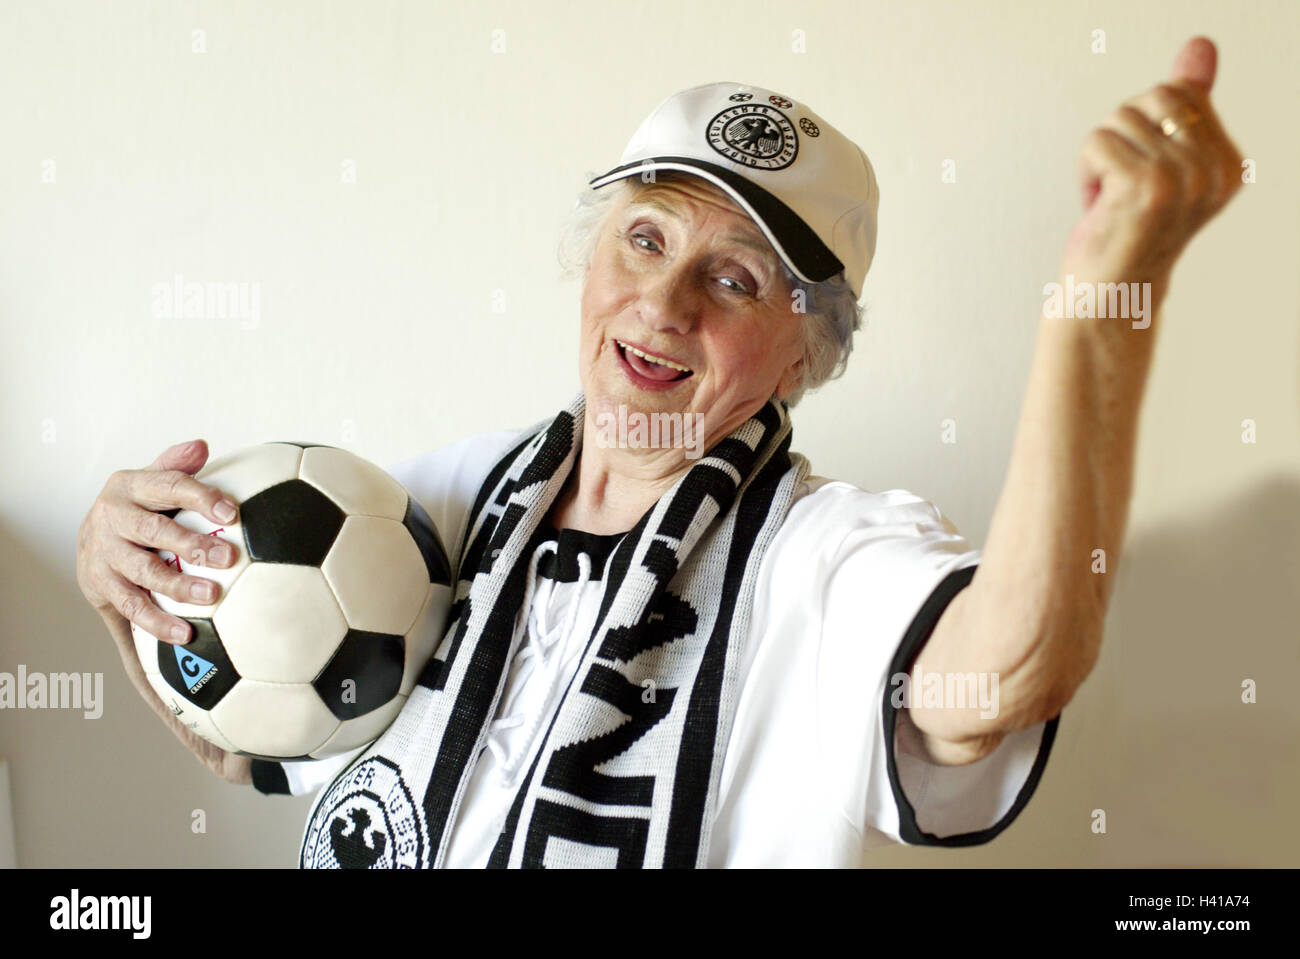 Senior, football fan, happily, gesture, cheering, ball, portrait, sport, football match, spectator, senior, pensioner, woman, old, agile, actively, young remaining, football follower, fan, follower, hobby, keen on sport, confidently, is convincing, motivates certainly about victory, happily, enthusiastically, contently, hope, optimism, confidence, laugh, rejoice, joy, enthusiasm, passion, fist, victory, tuning positively, German Football Association, German Football Association-fan article, fan article in an old-fashioned way, outfit, football, scarf, cap, cap, headgear, national pride, in Stock Photo